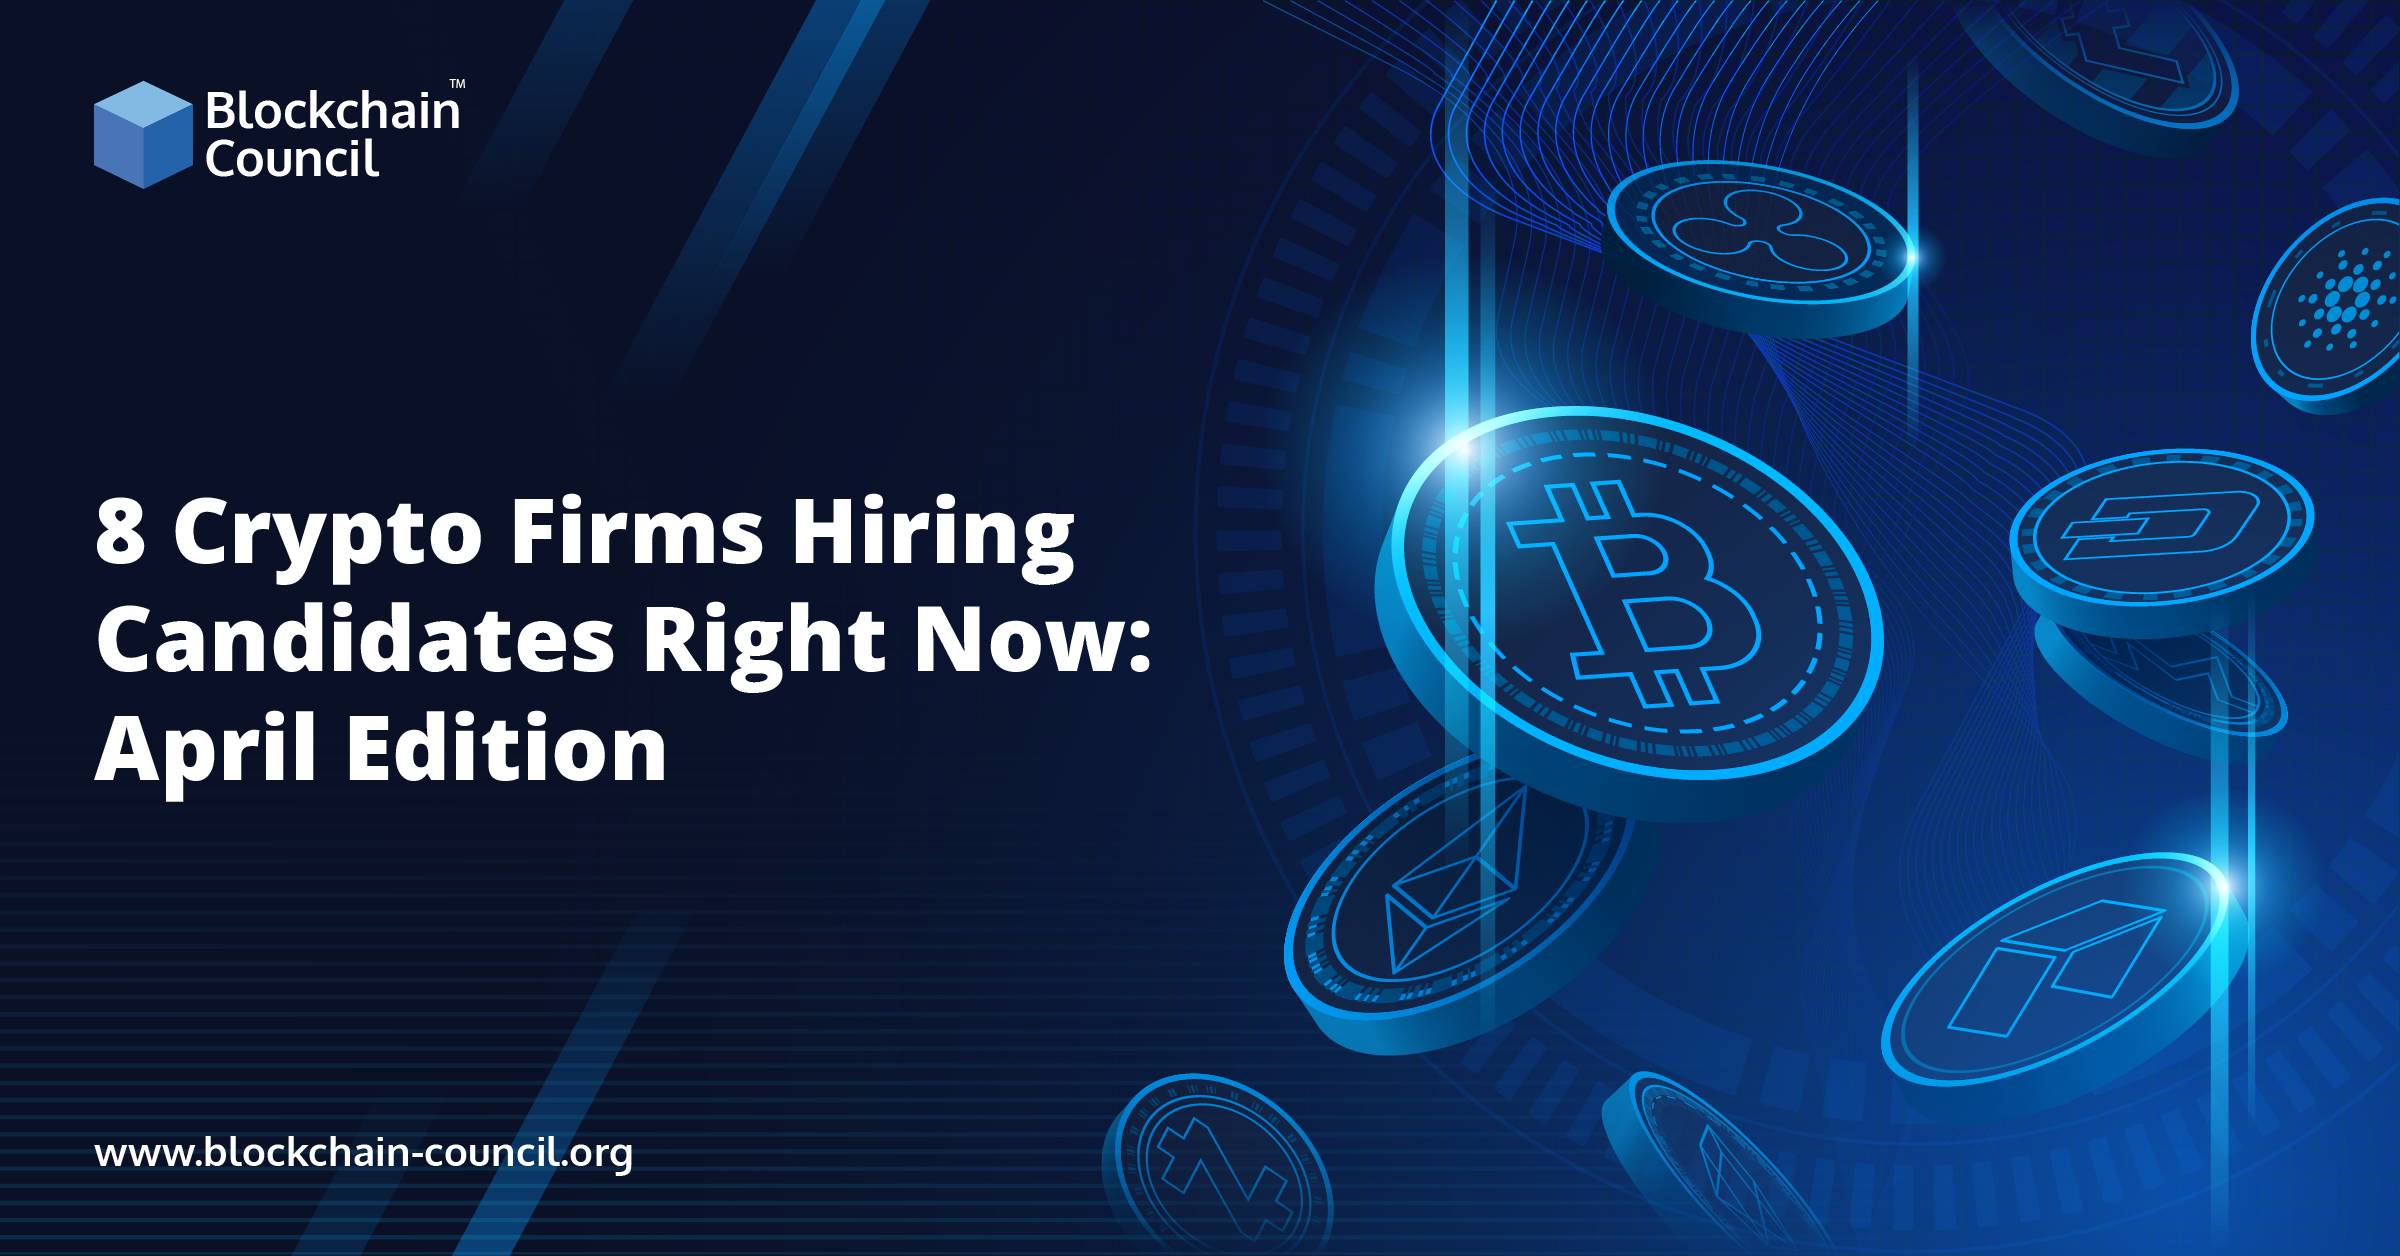 8 Crypto Firms Hiring Candidates Right Now